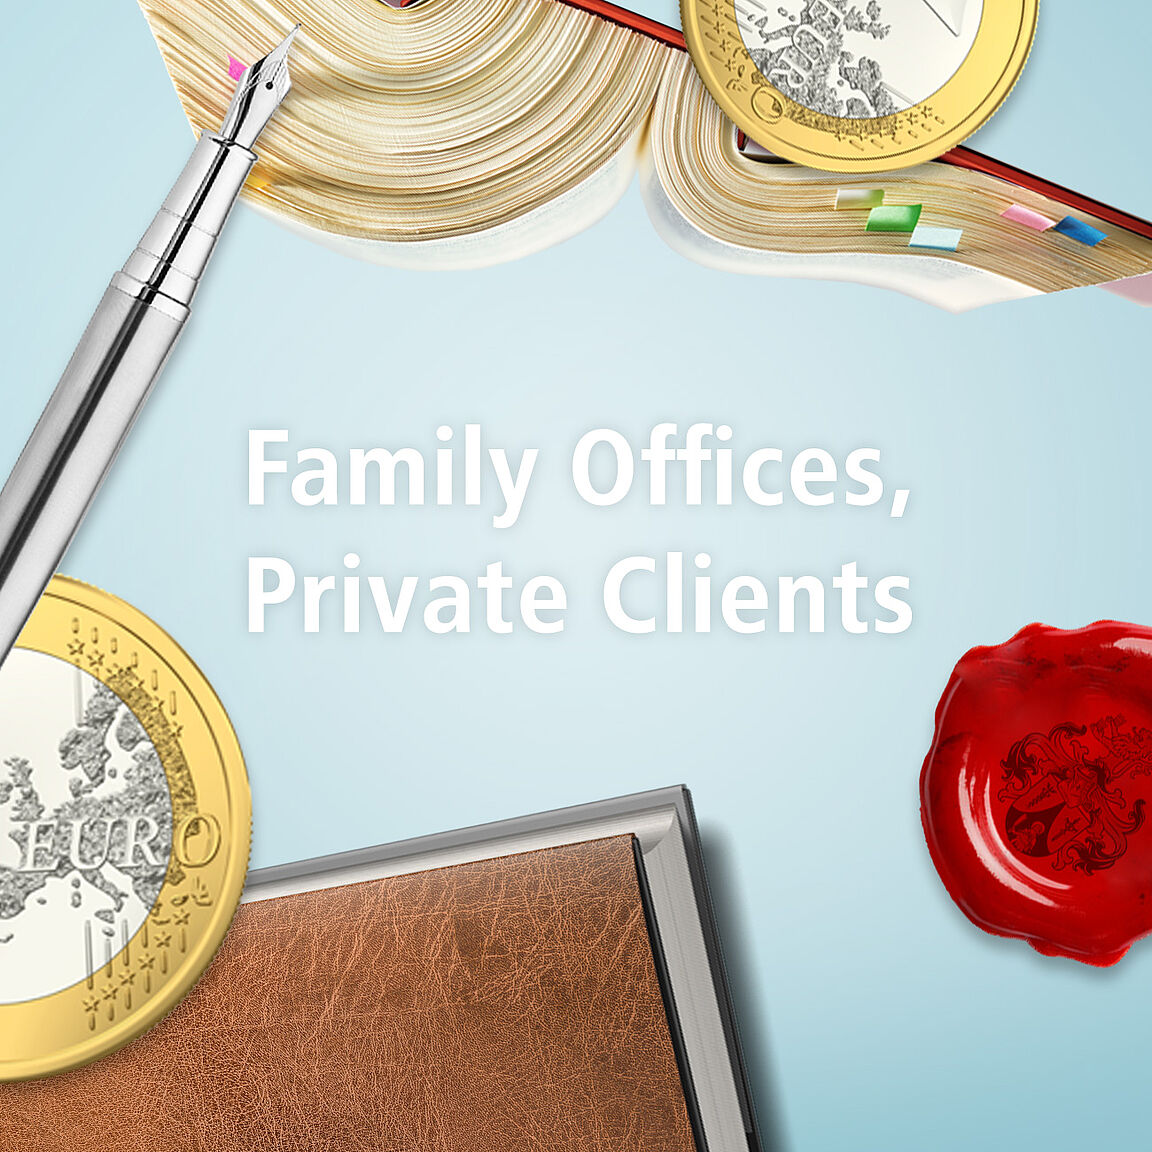 private clients, family offices